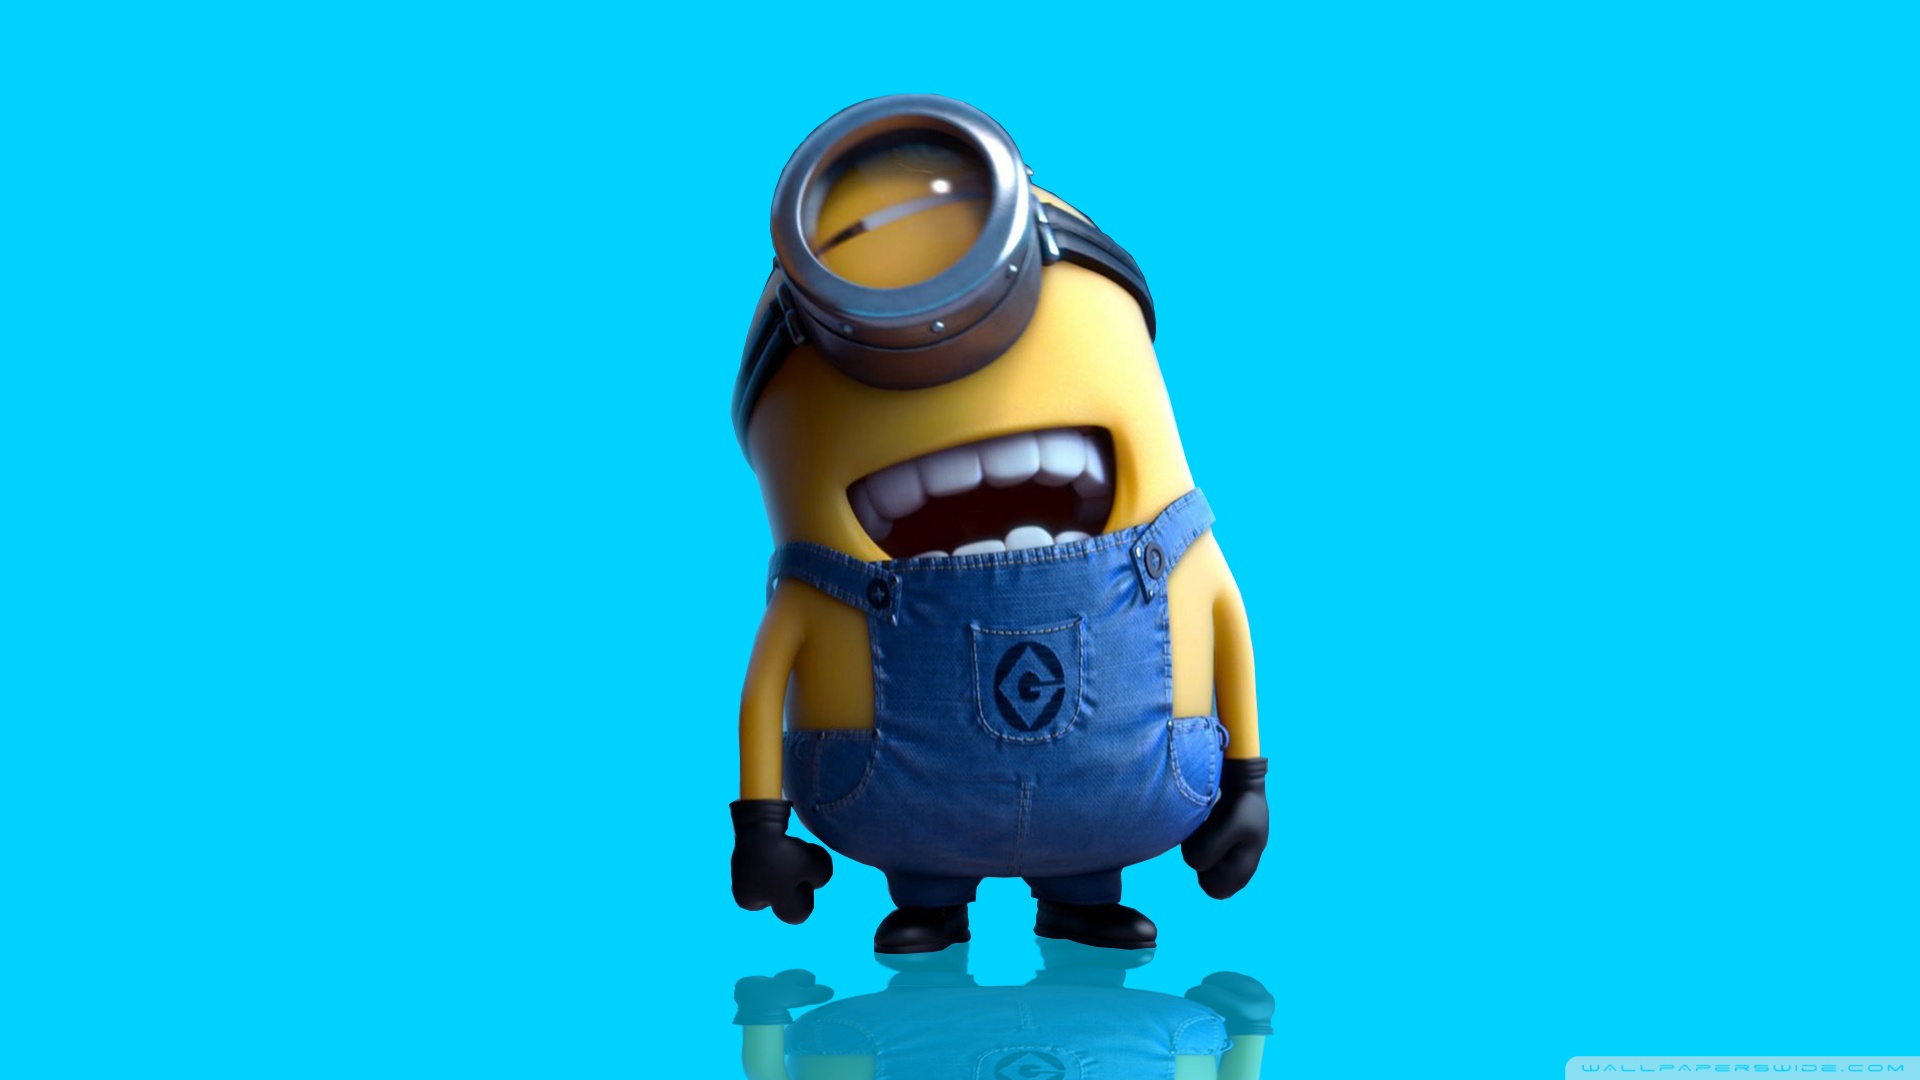 minions wallpaper,toy,action figure,yellow,animation,fictional character